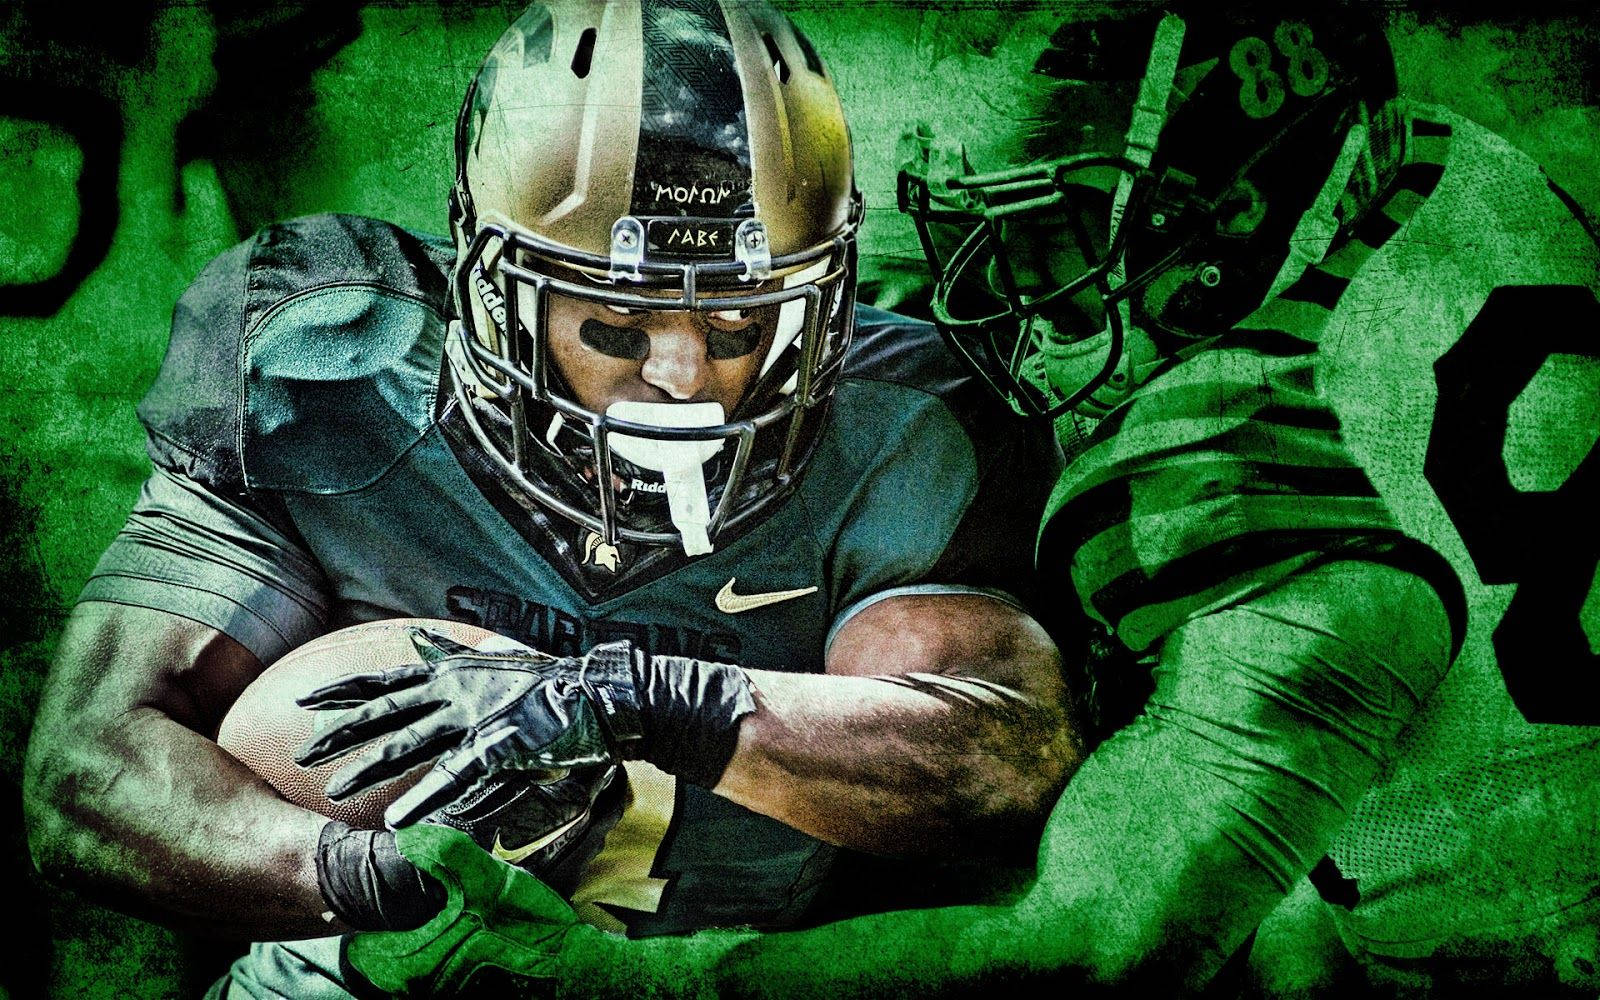 Michigan State University Football Player In Action Background